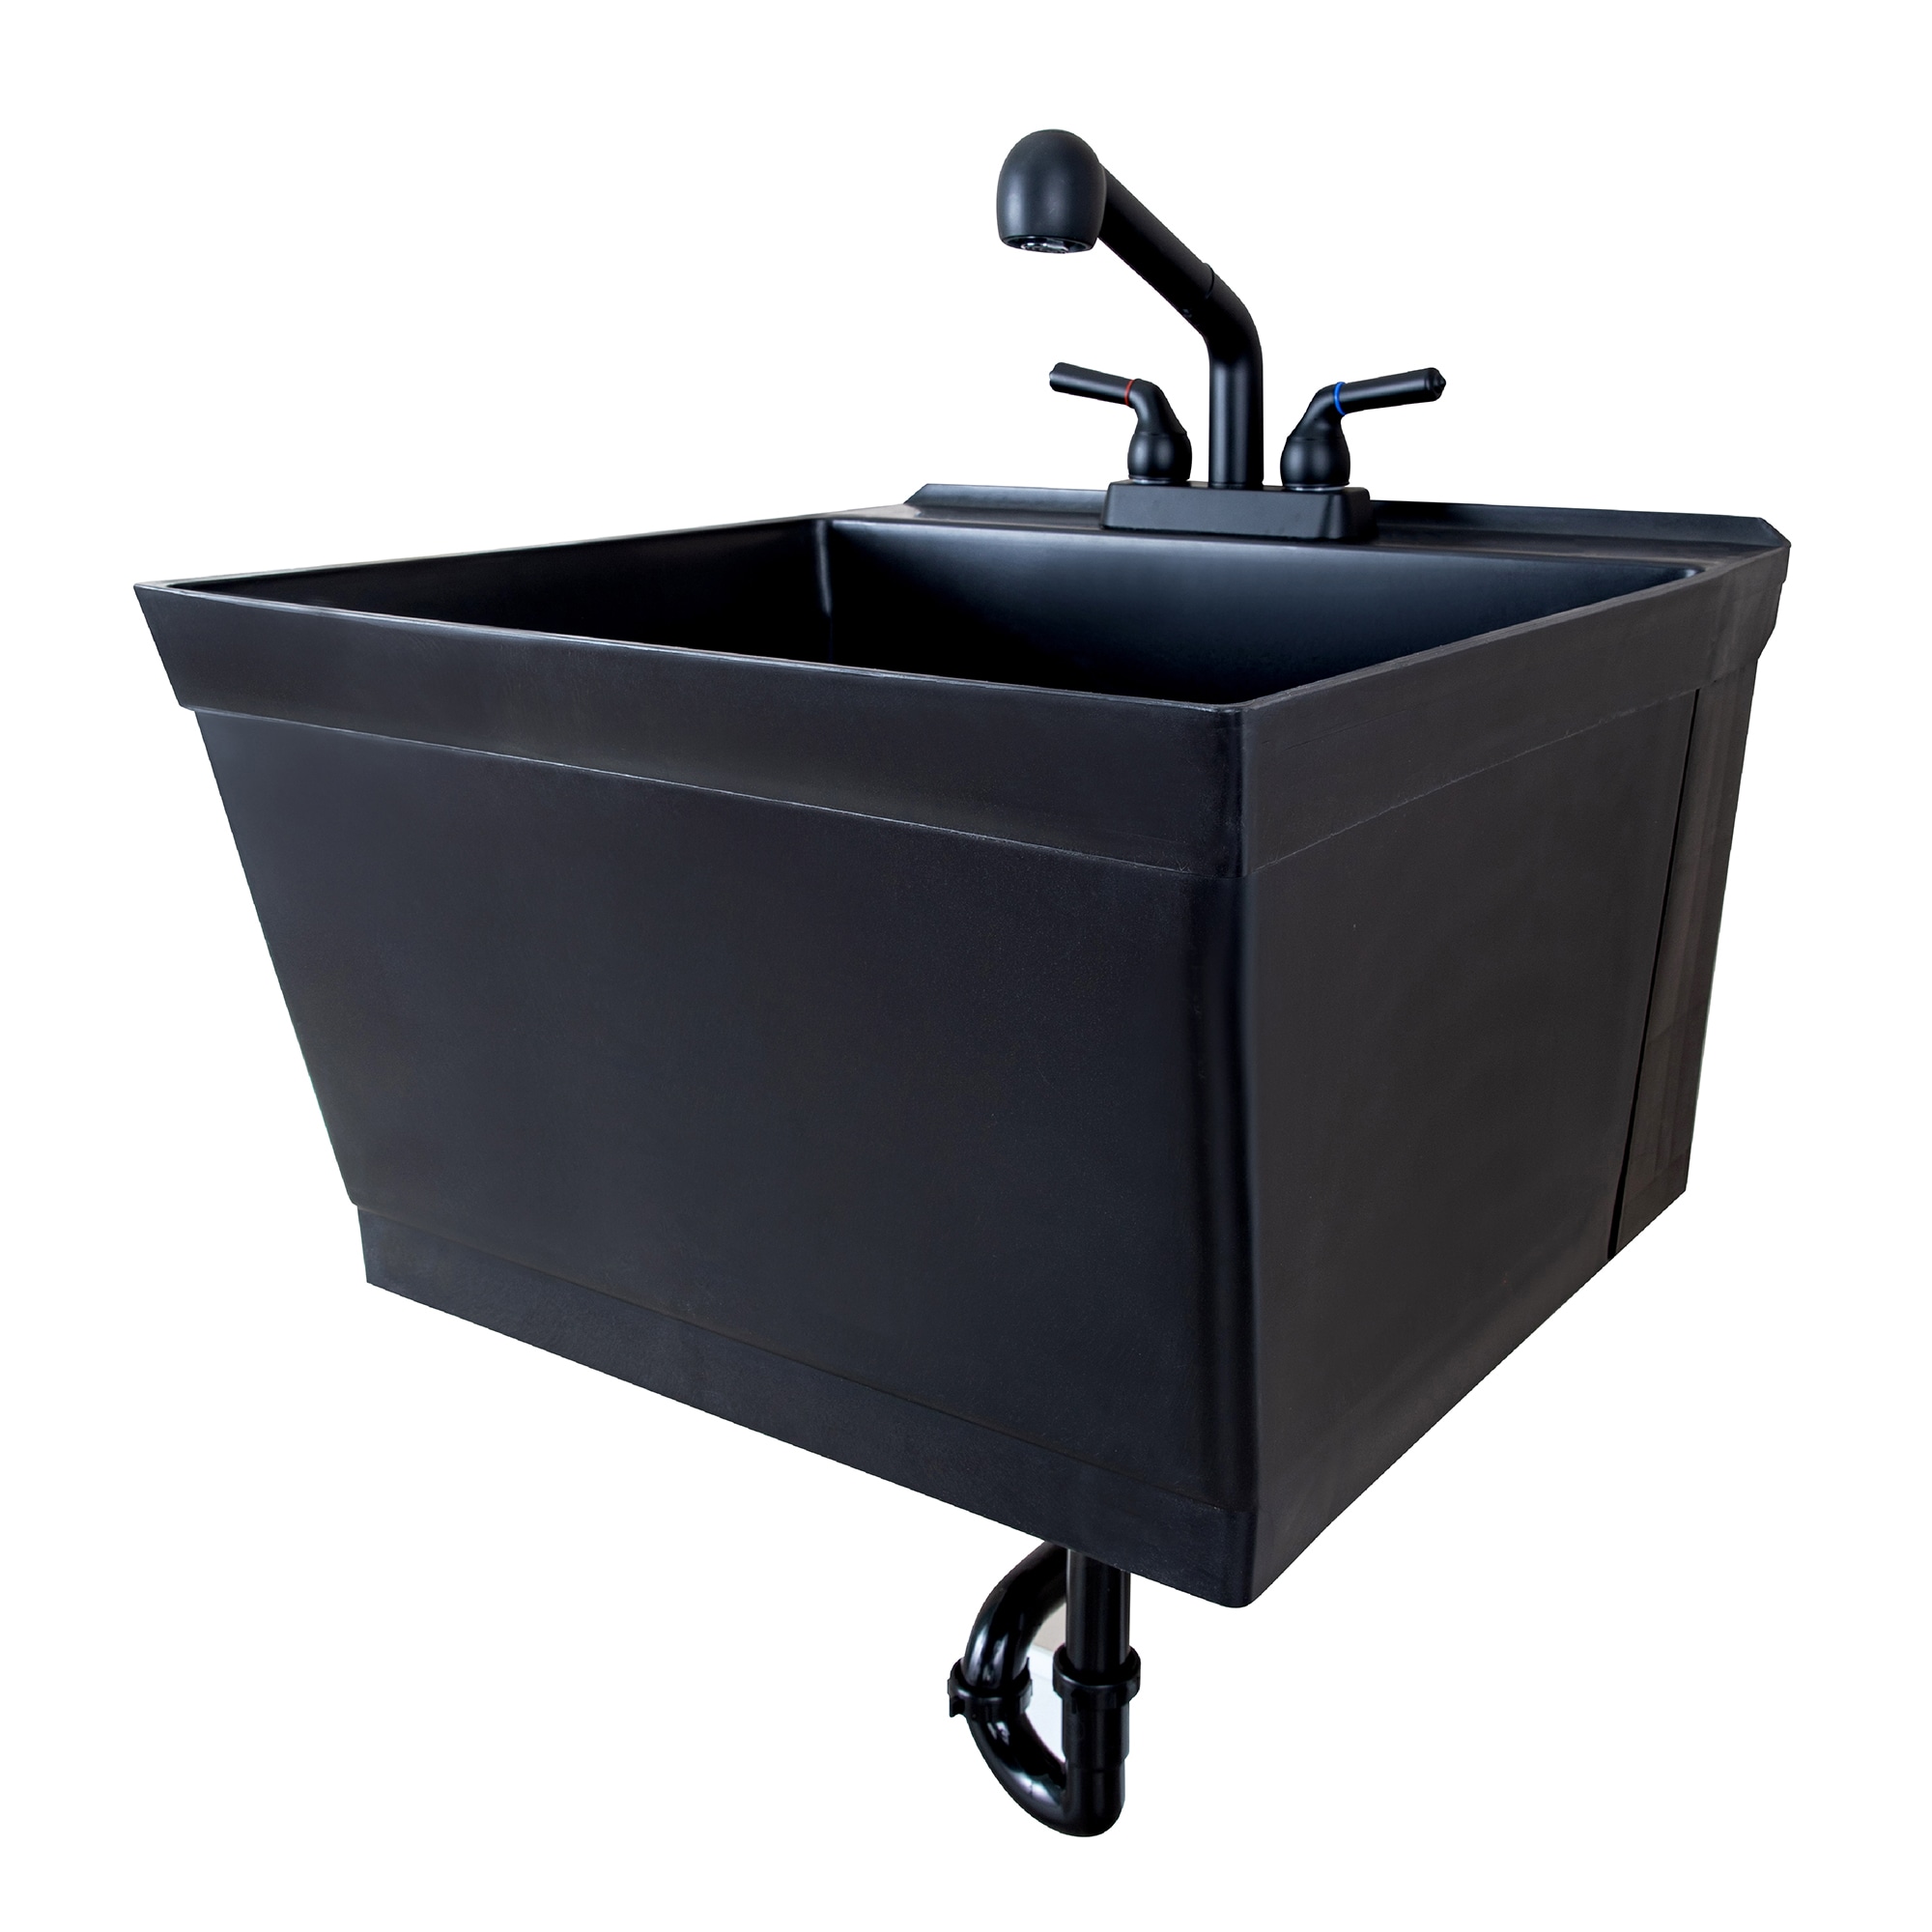 UTILITYSINKS USA-Made Plastic Freestanding 24 in x 24-Inch UtilityTub Heavy  Duty Compact Utility Sink Ideal for Workshop, Laundry Room, Garage